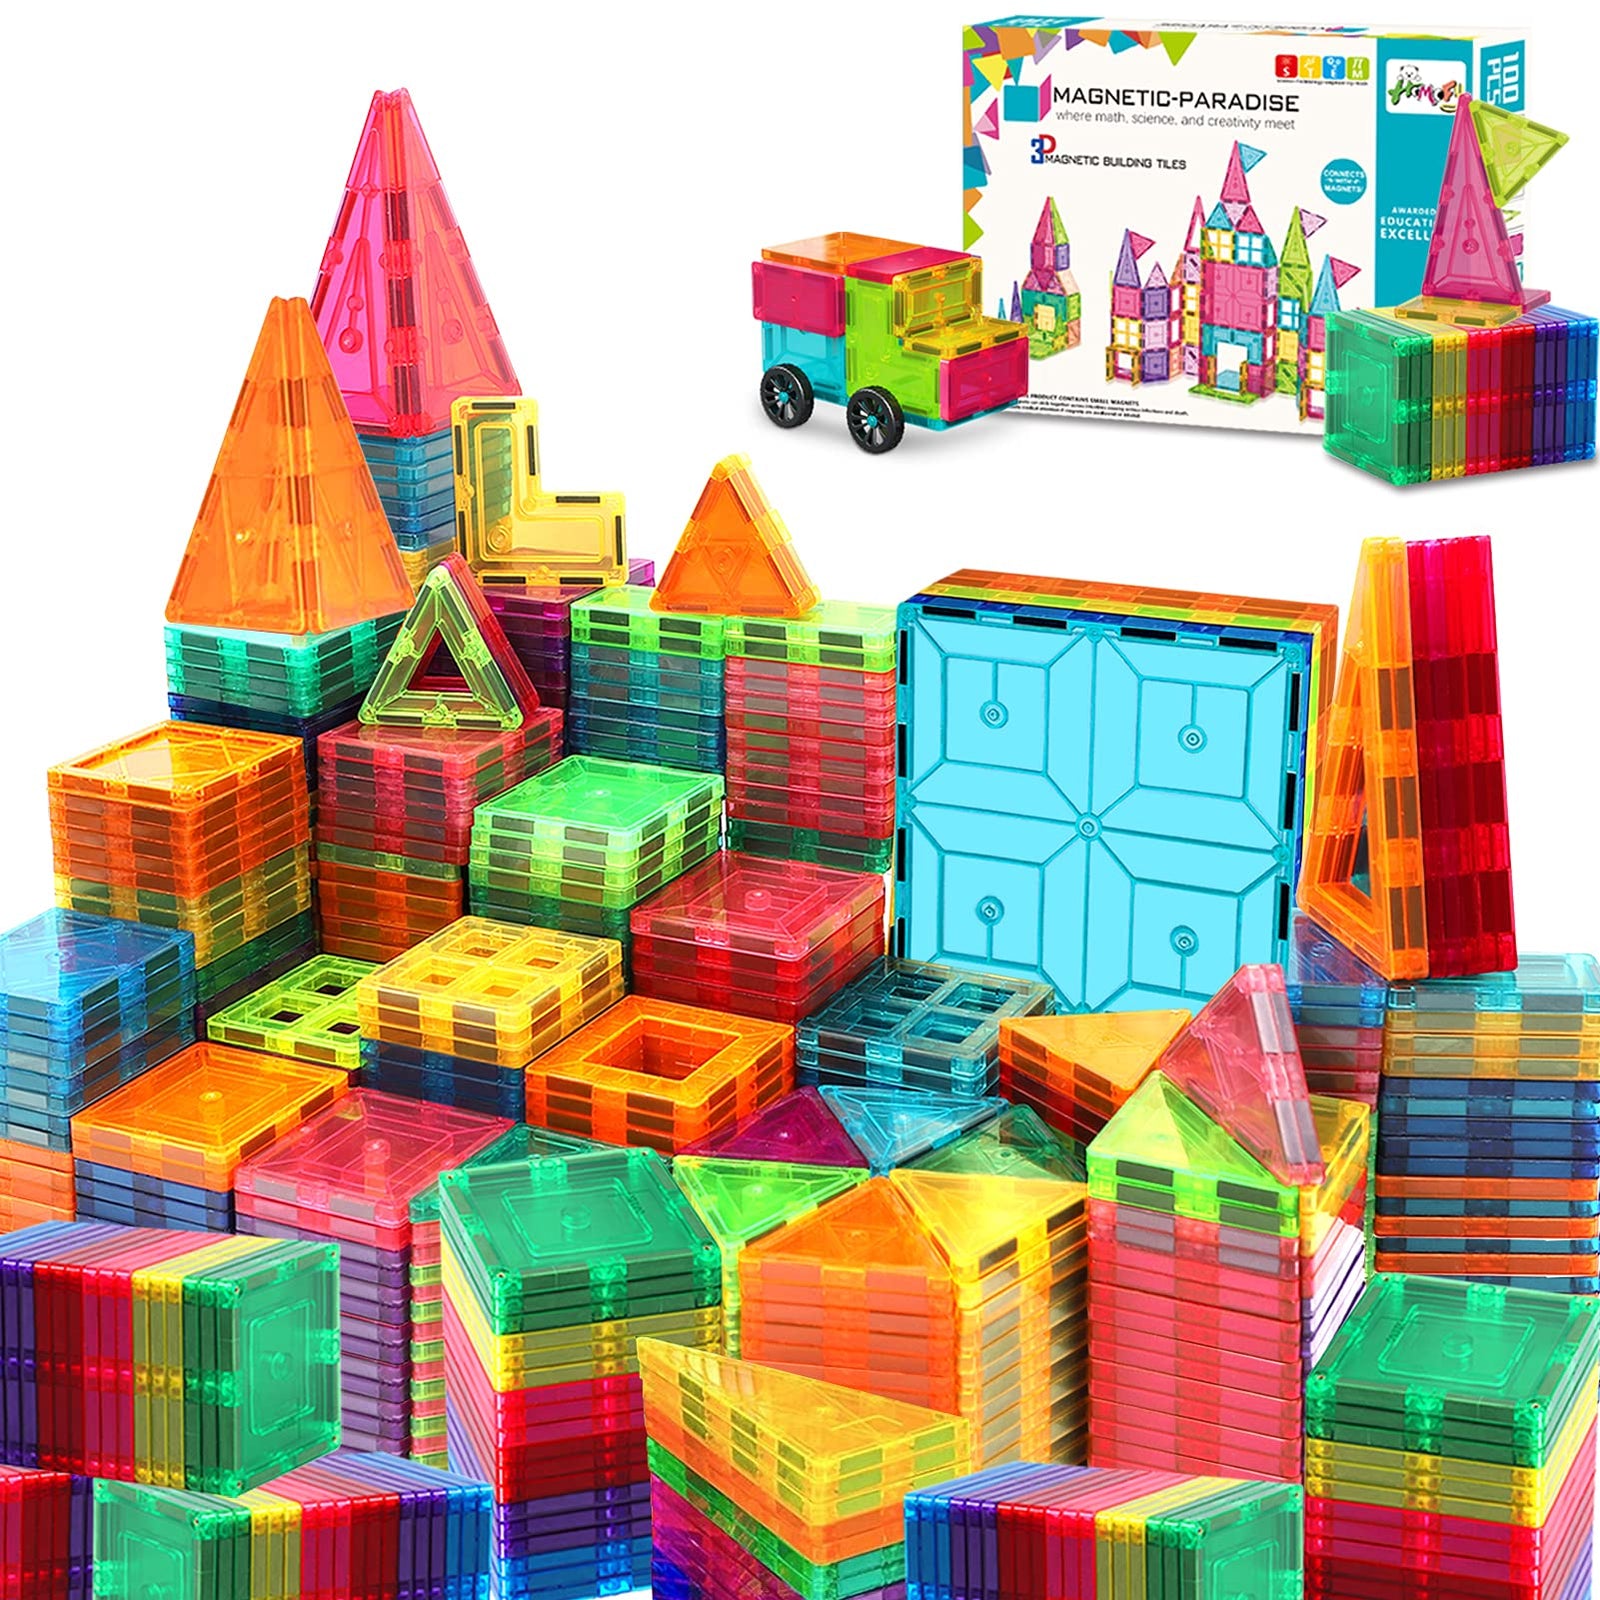 Landtaix Kids Magnet Tiles Toys New Upgrade 100Pcs Oversize 3D Magnetic Building Blocks Tiles Set,Inspirational Educational Toys for 3 4 5 6 Year Old Boys Gilrs Gifts